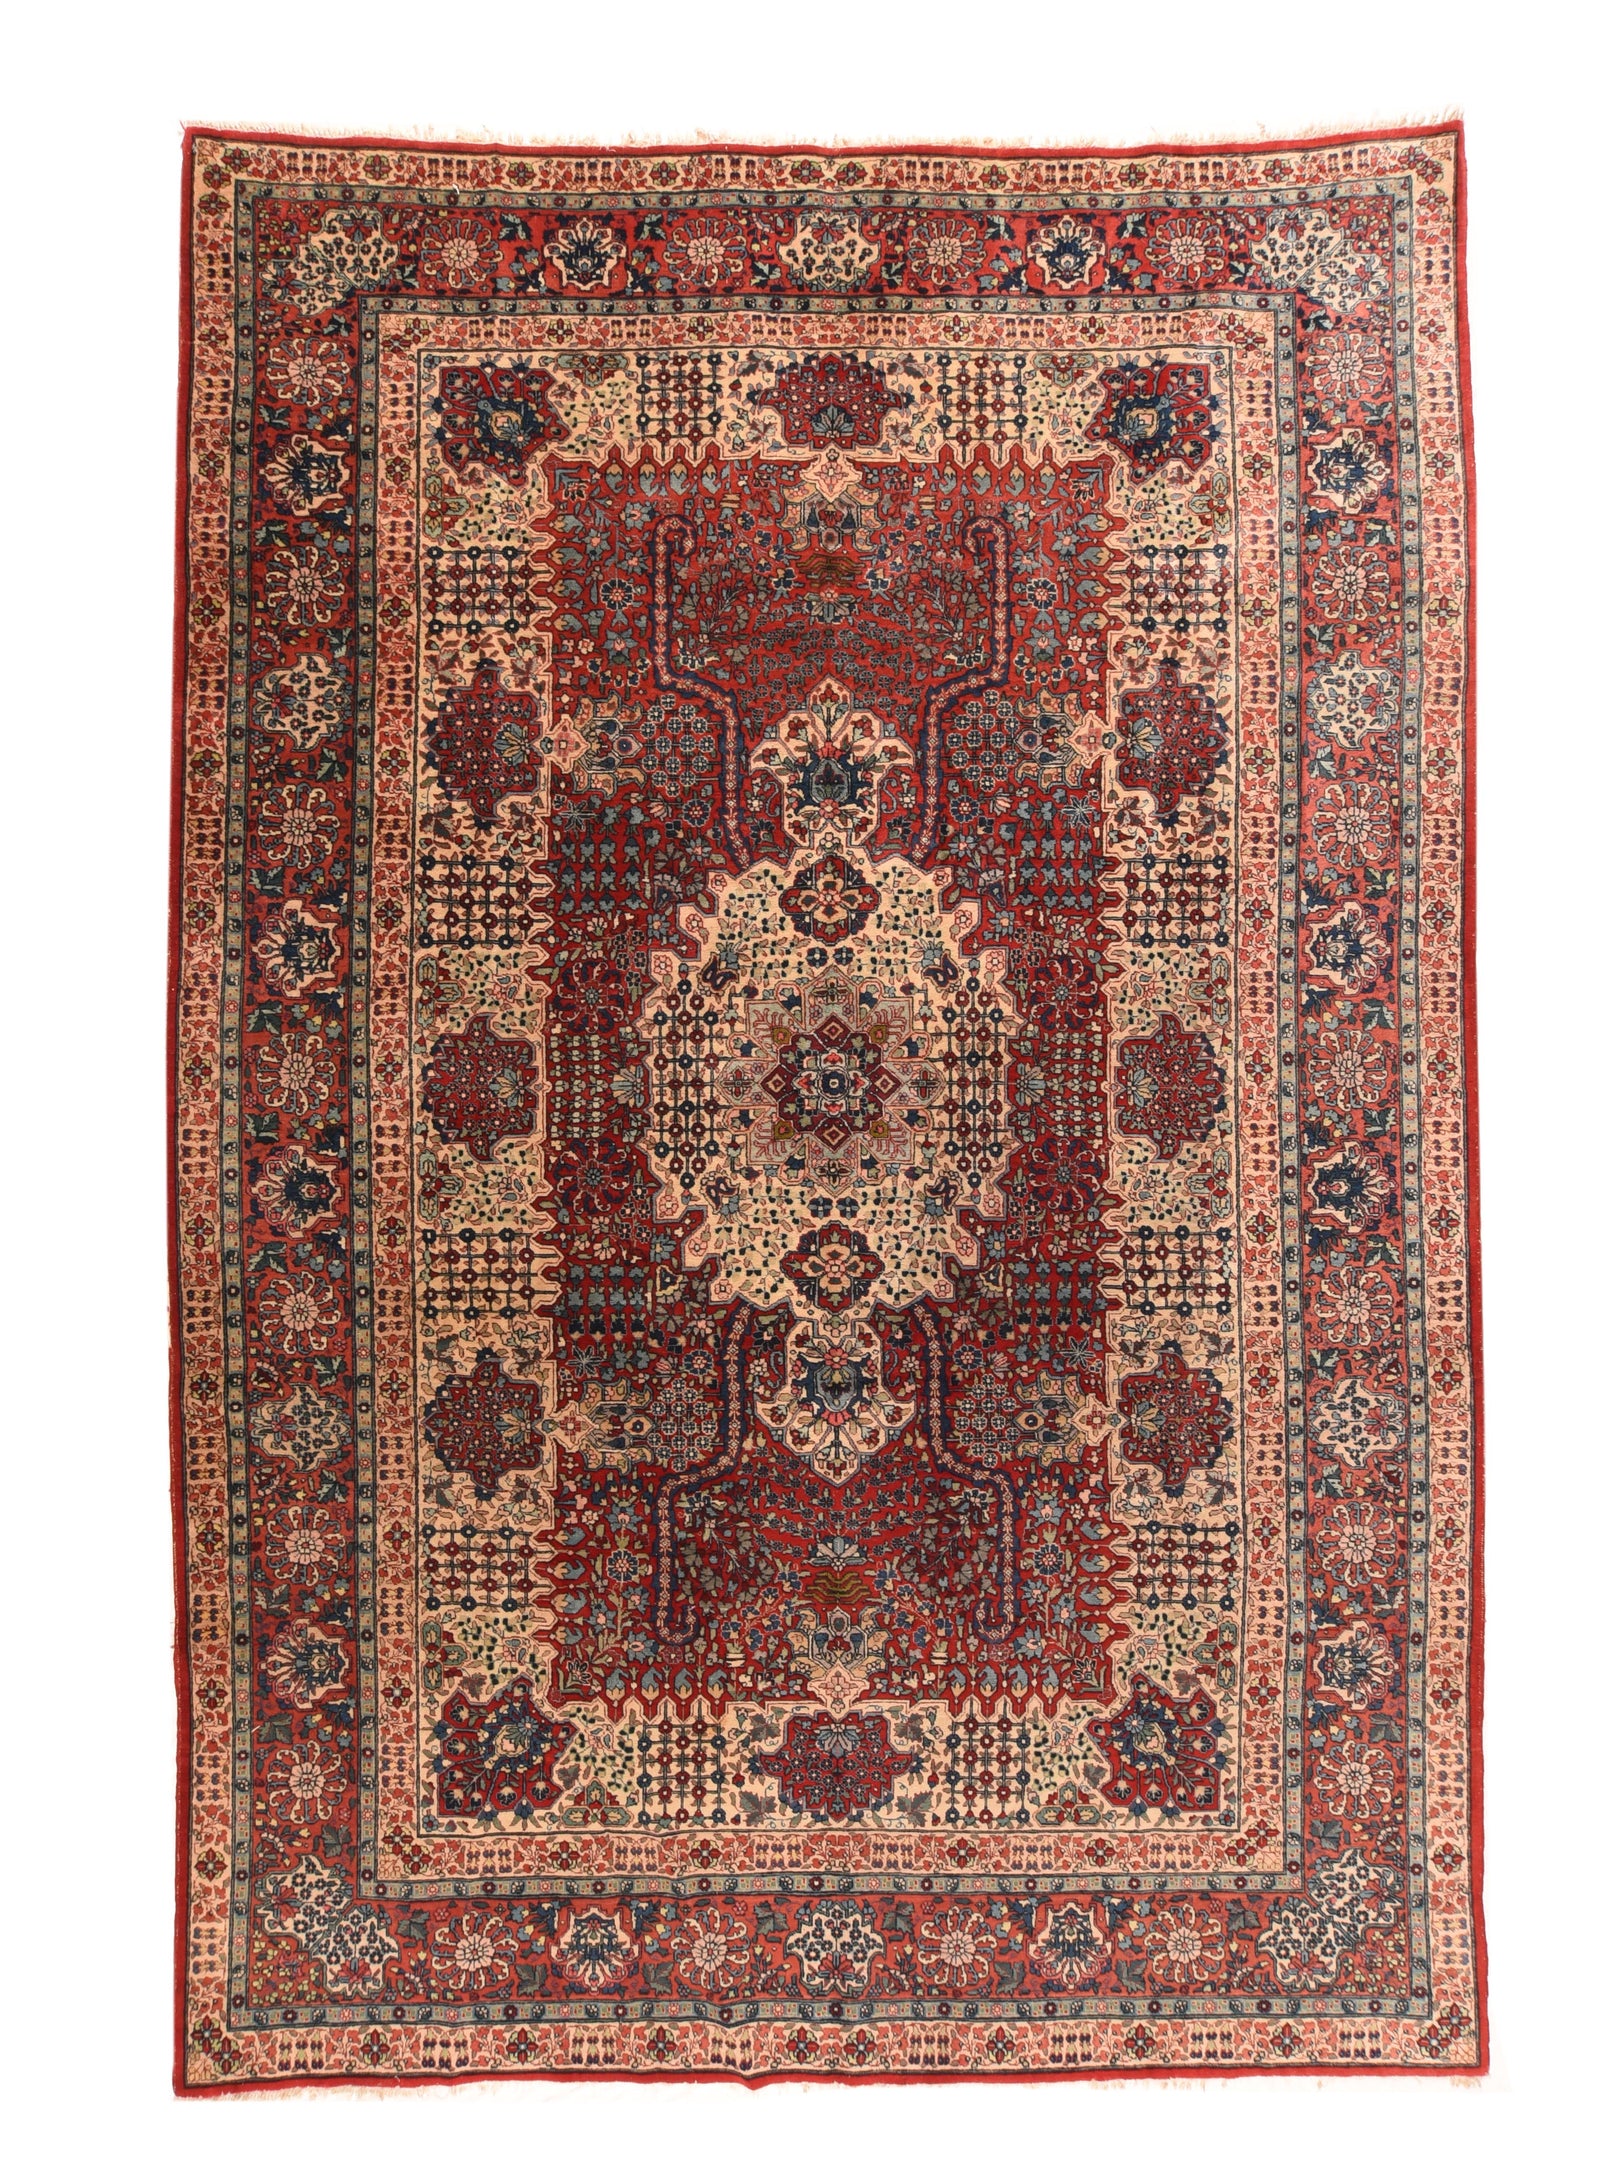 Antique Green Fine Indian Agra Area Rug